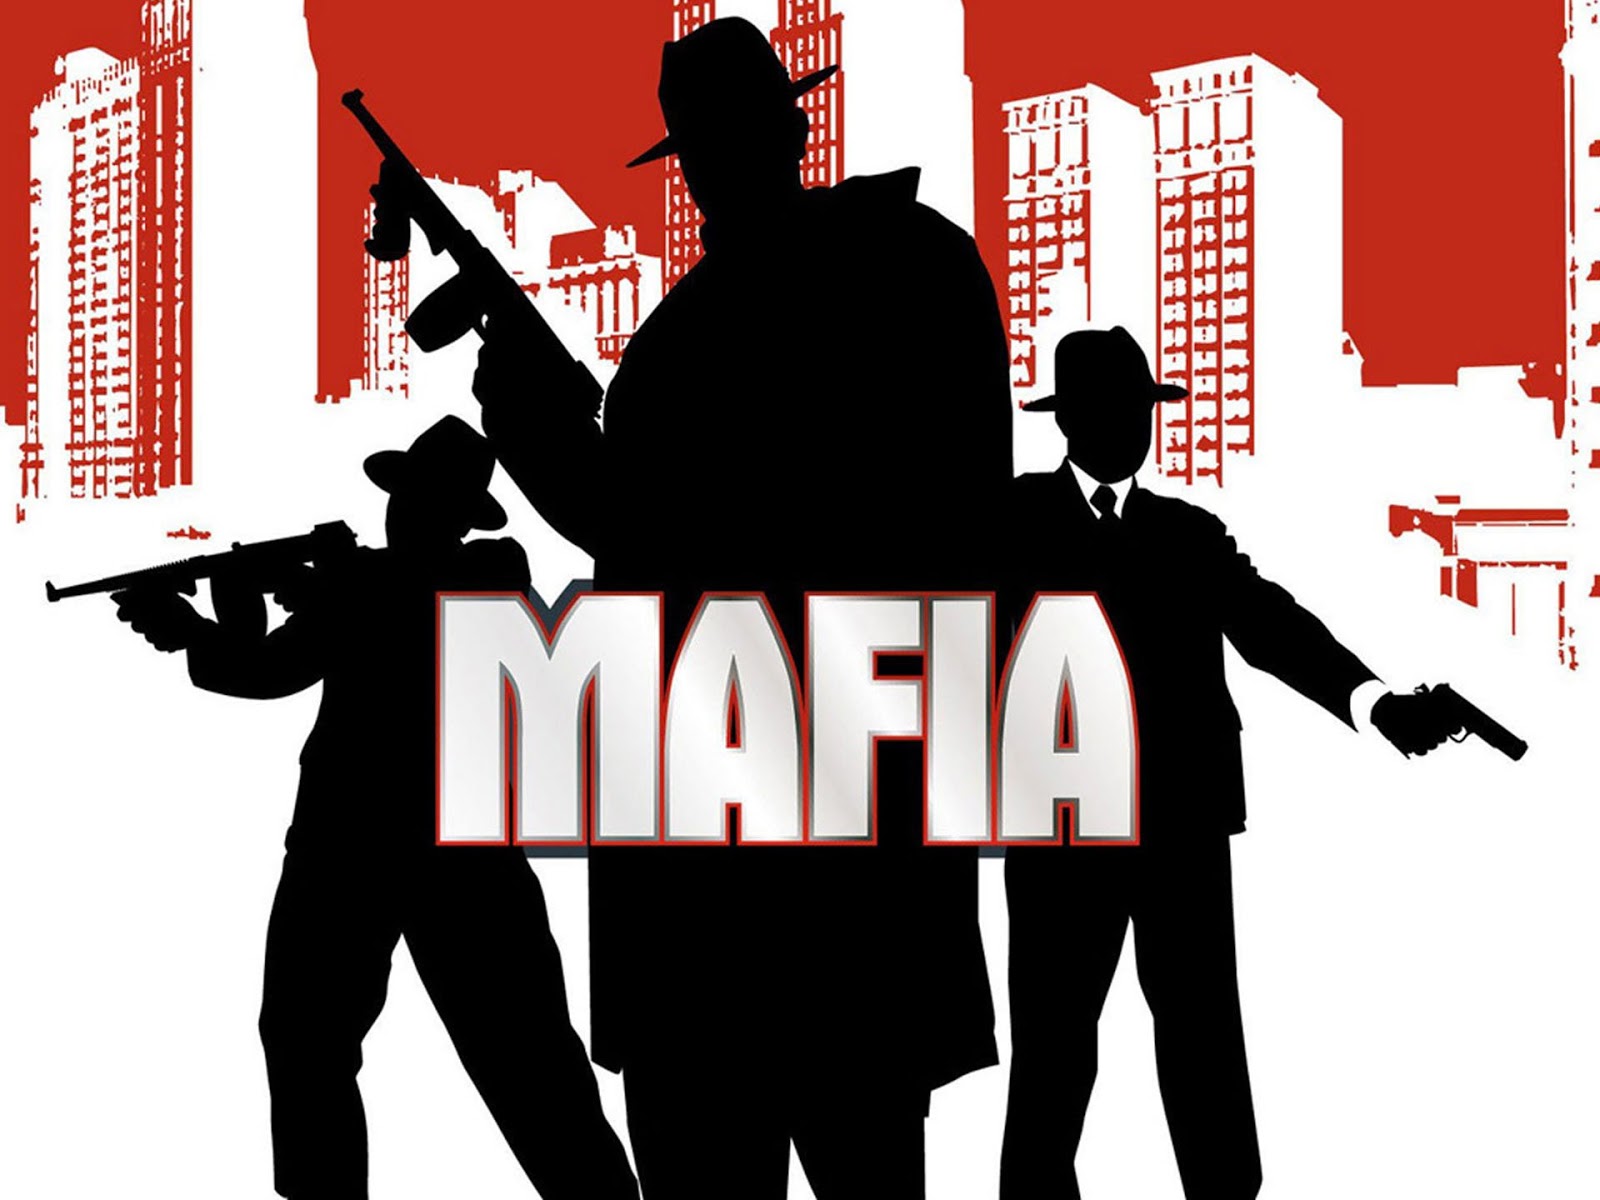 Bristolian Gamer: Mafia Review - A clunky but wonderful experience.